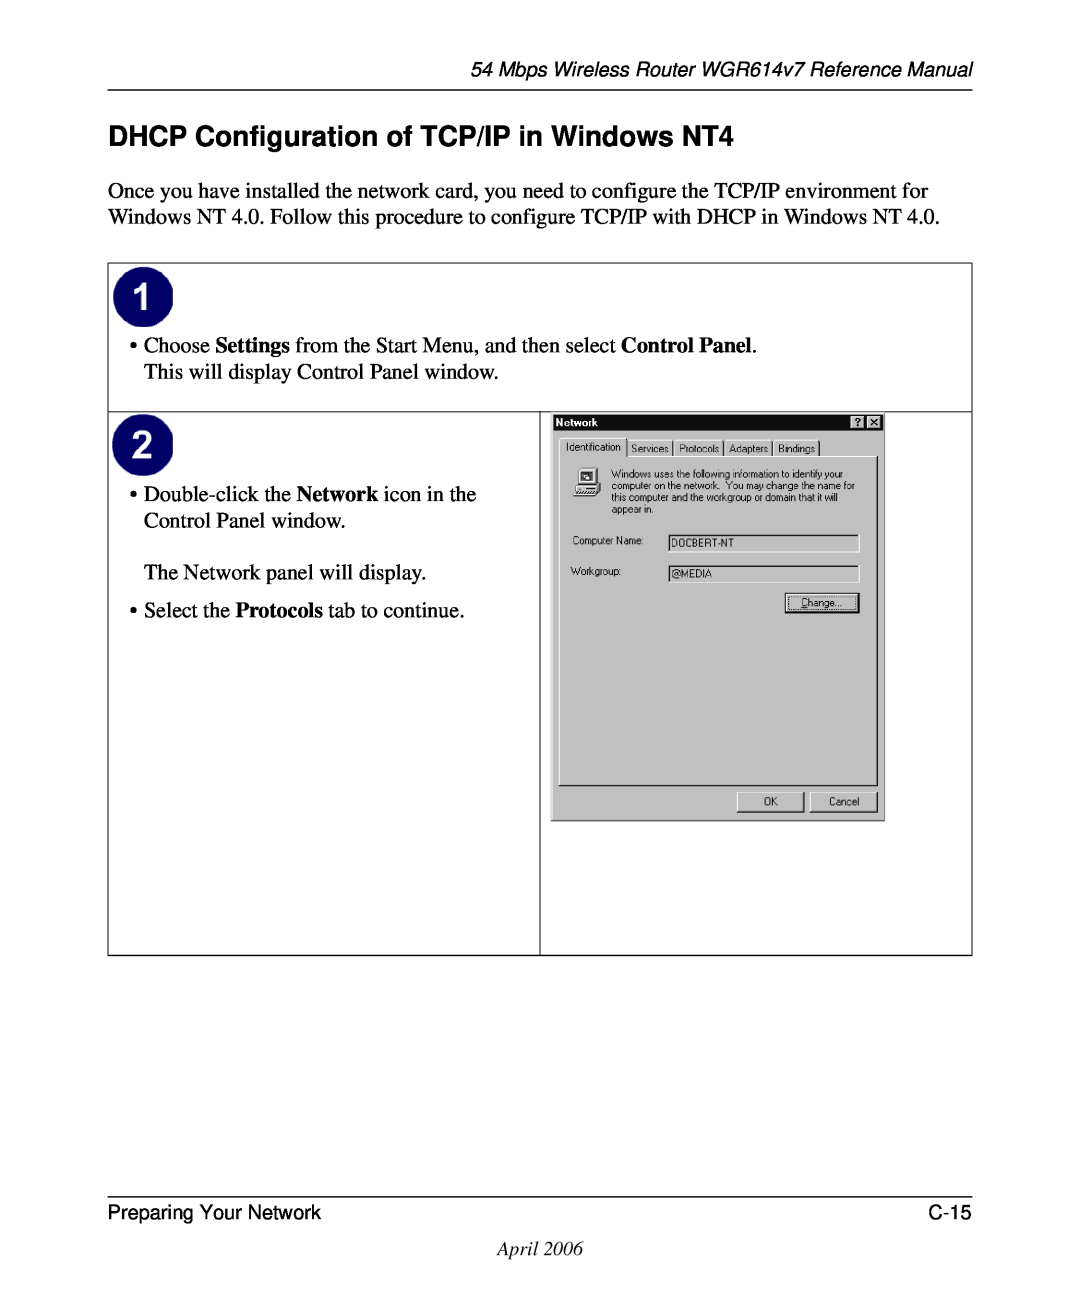 NETGEAR WGR614v7 manual DHCP Configuration of TCP/IP in Windows NT4 